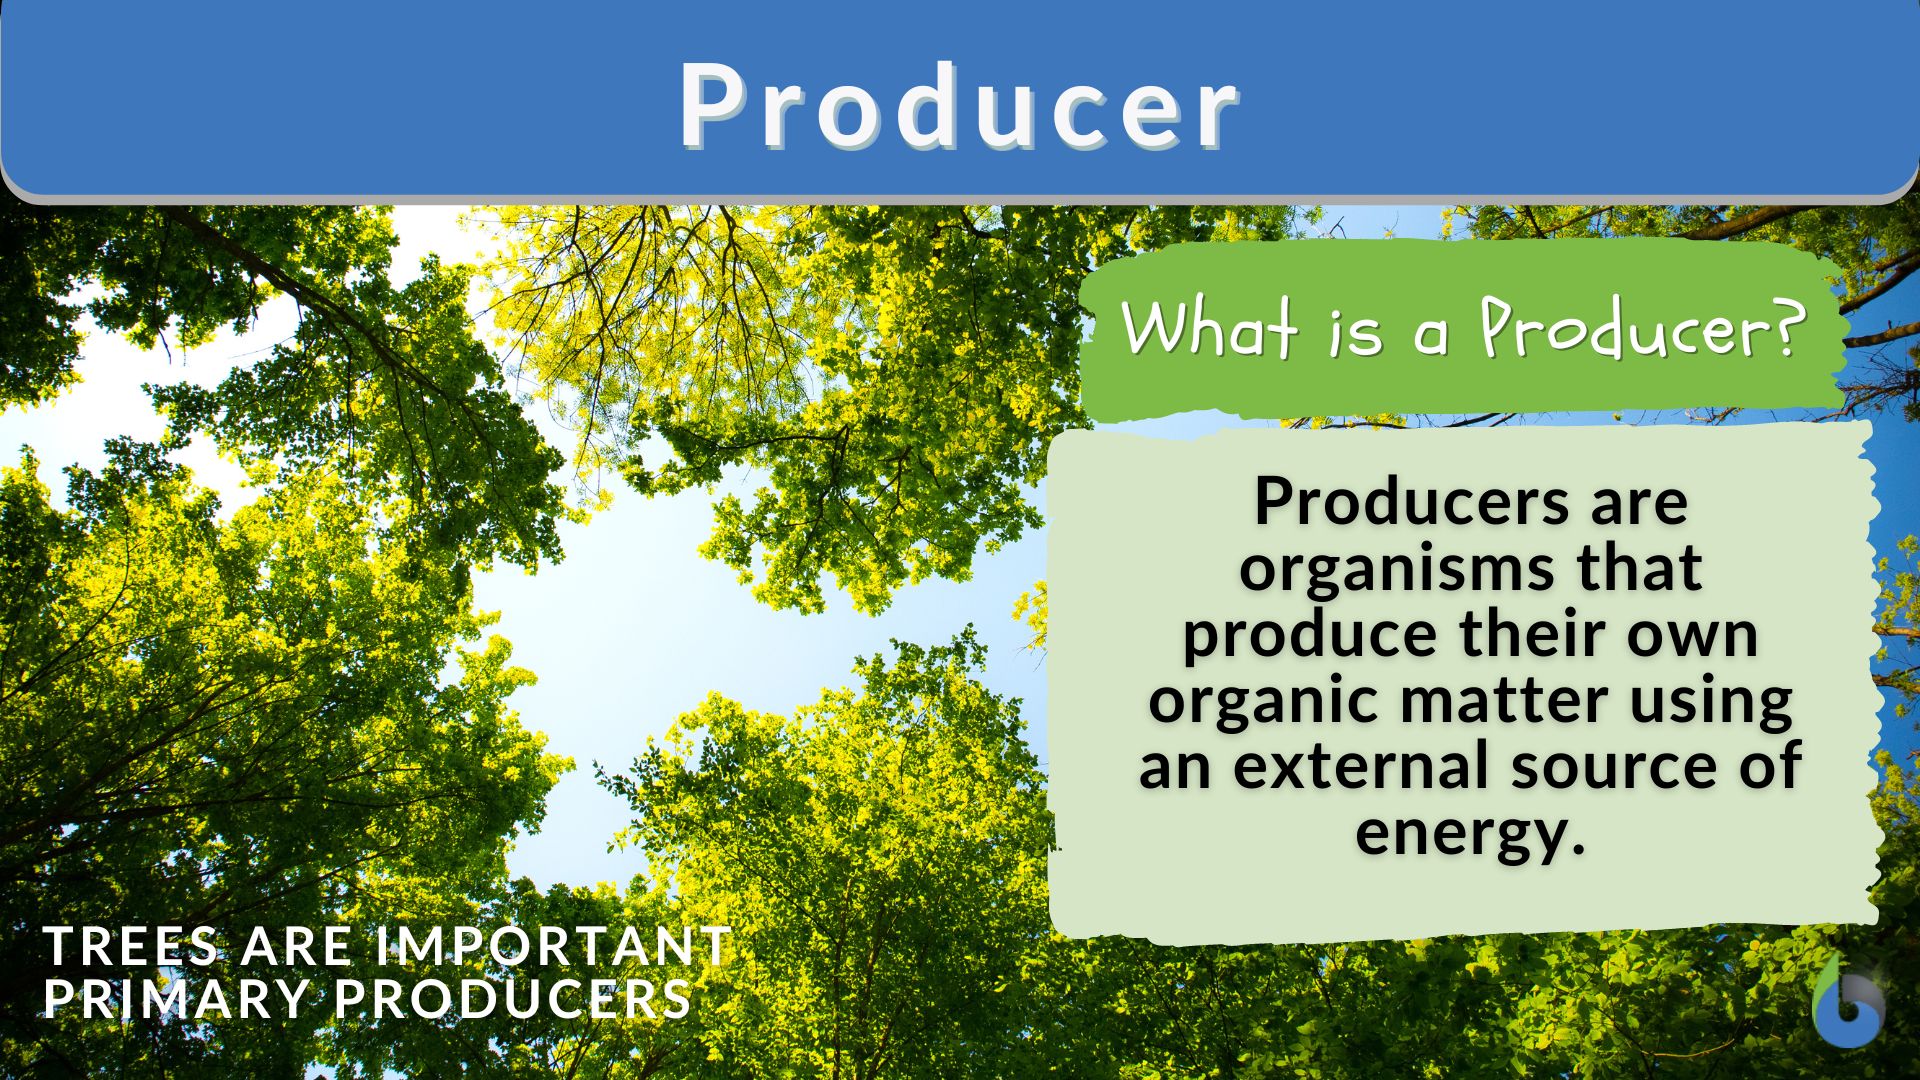 Producer - Definition and Examples - Biology Online Dictionary